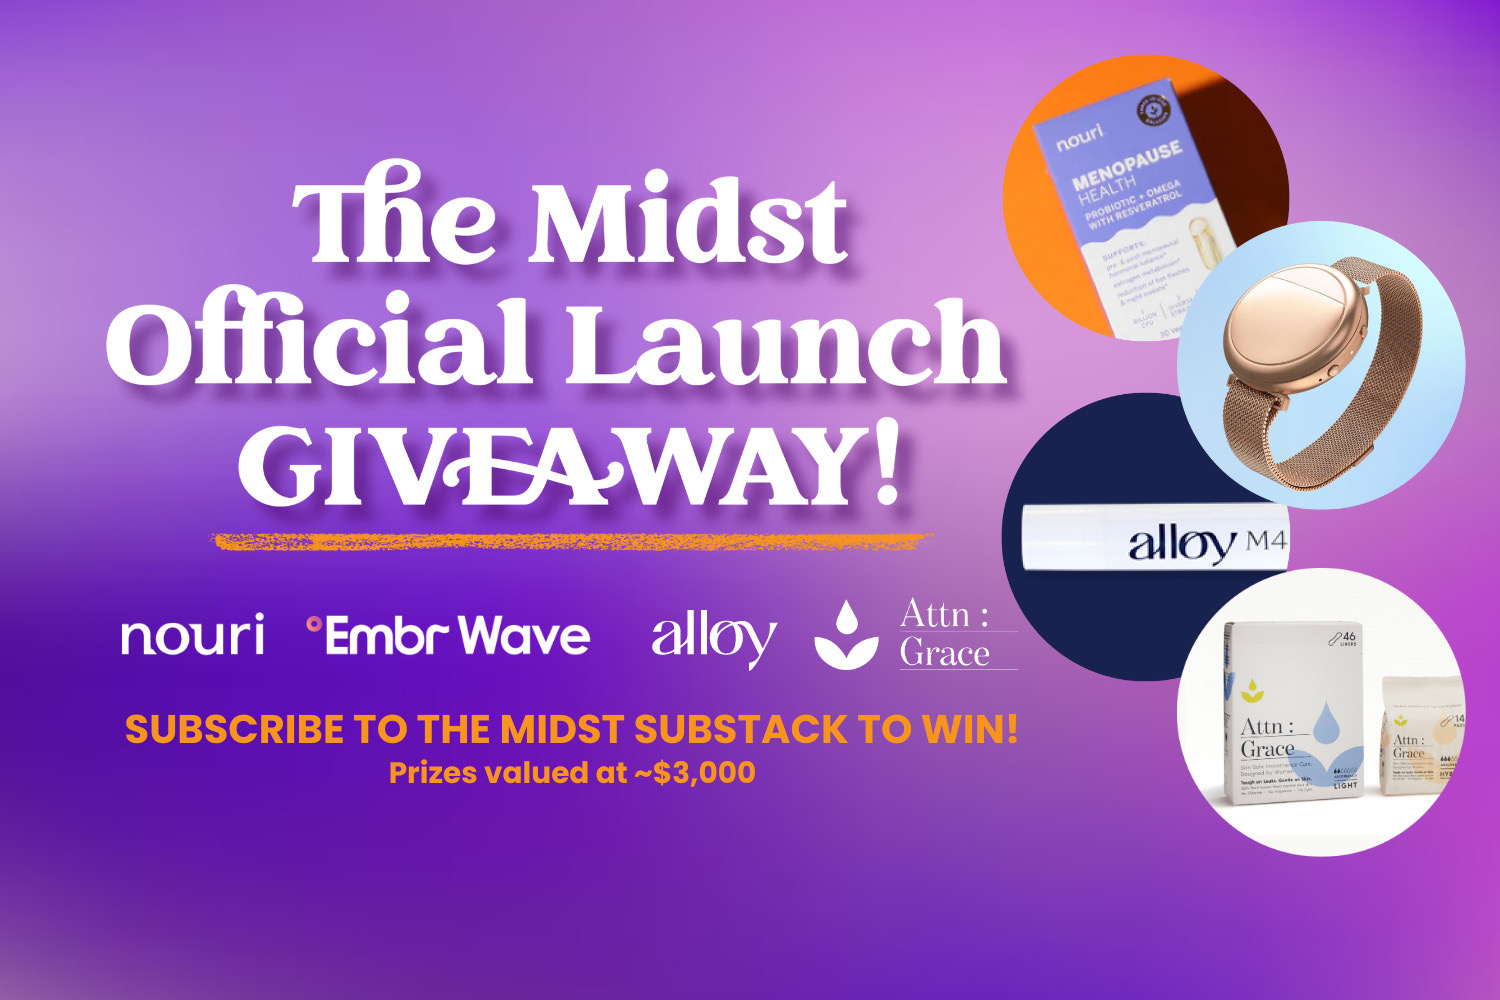 The Midst launch giveaway